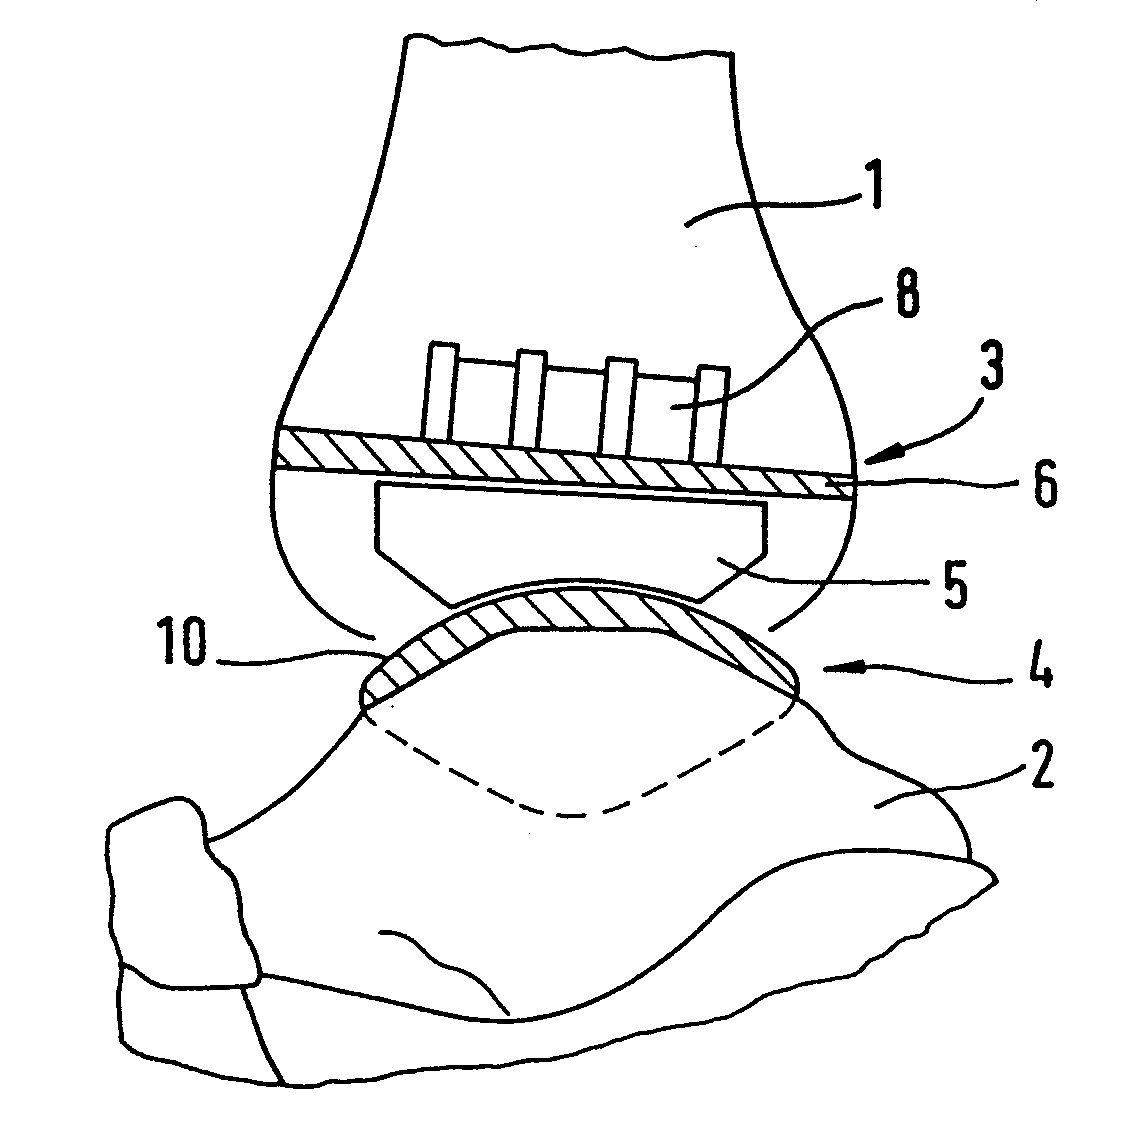 Ankle-joint endoprosthesis